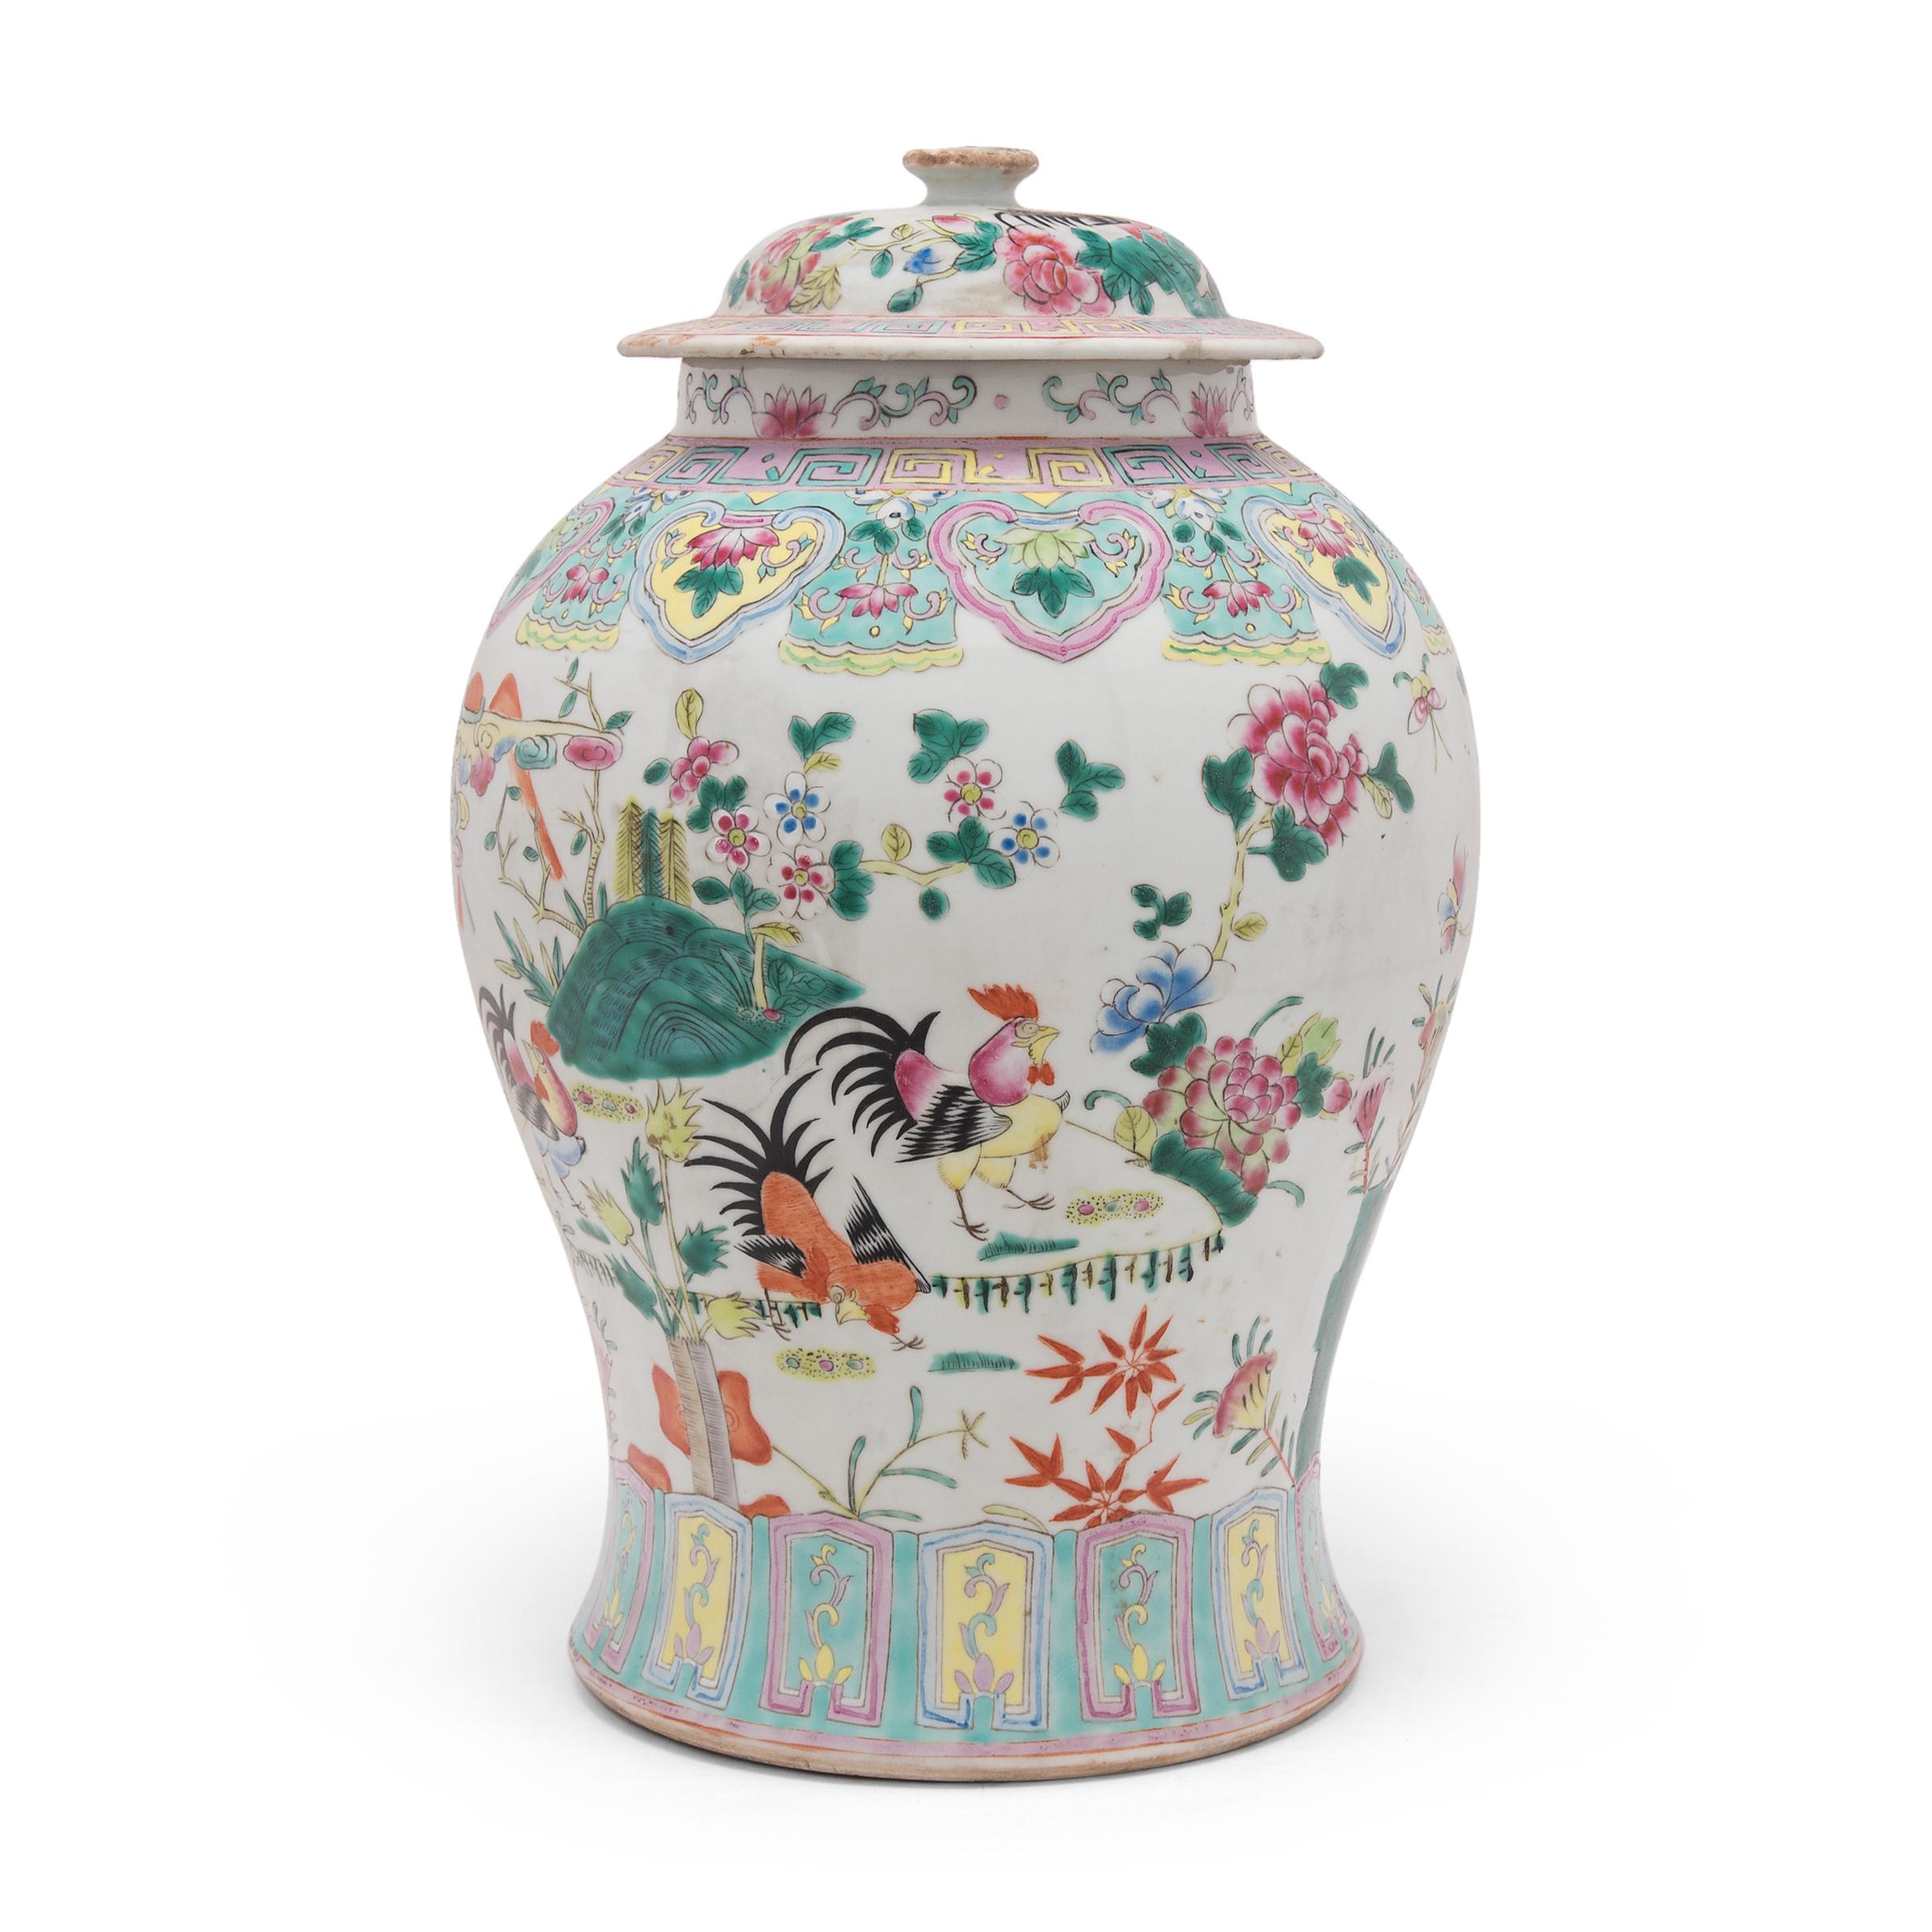 Chinese Export Chinese Famille Rose Rooster Baluster Jar, c. 1900